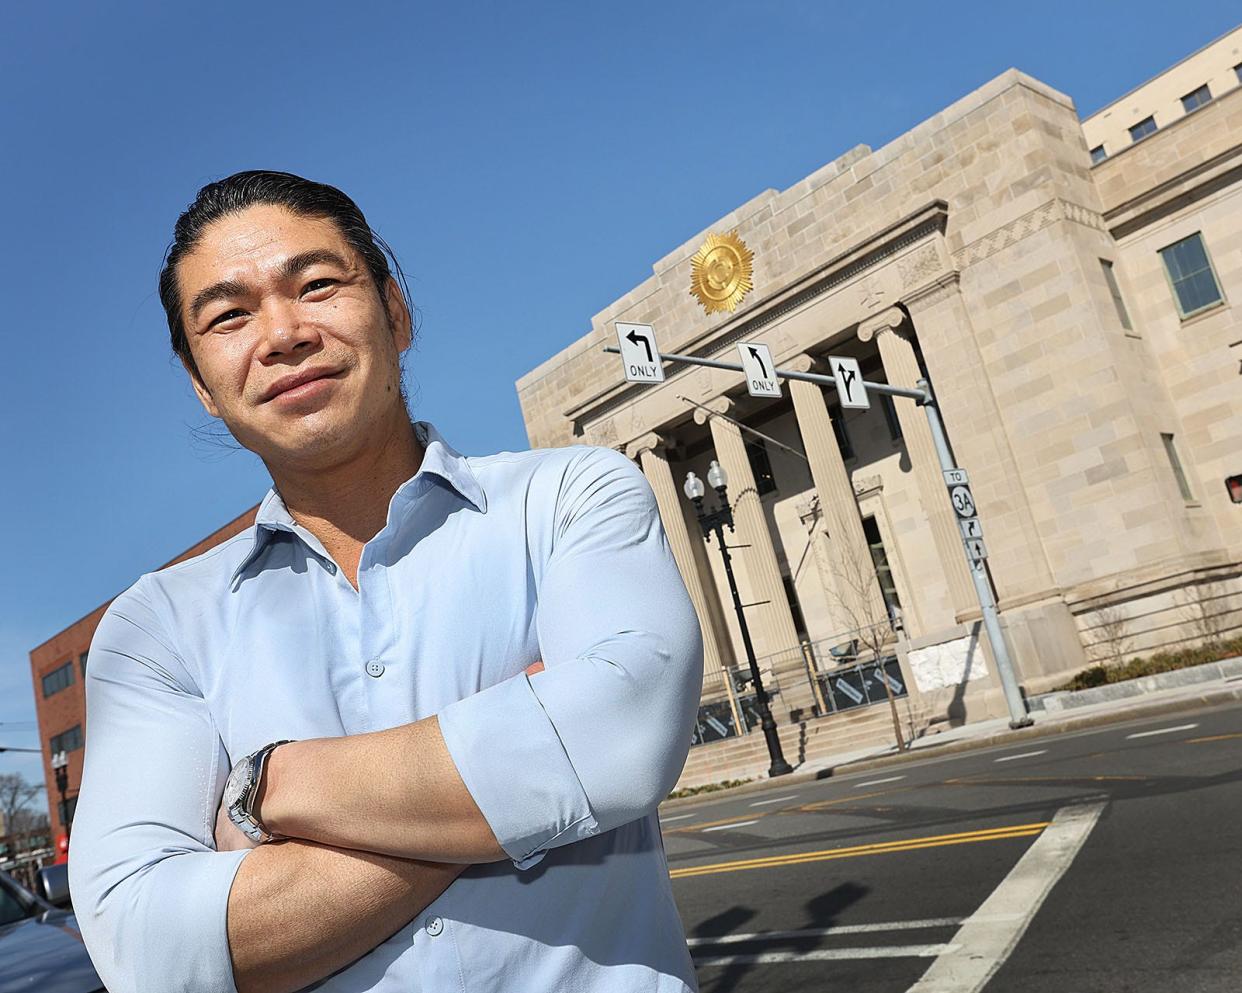 Quincy restaurateur Jimmy Liang talks about his latest venture, Masons Steak House, which will open this fall at the former Masonic Temple on Hancock Street in Quincy Square.